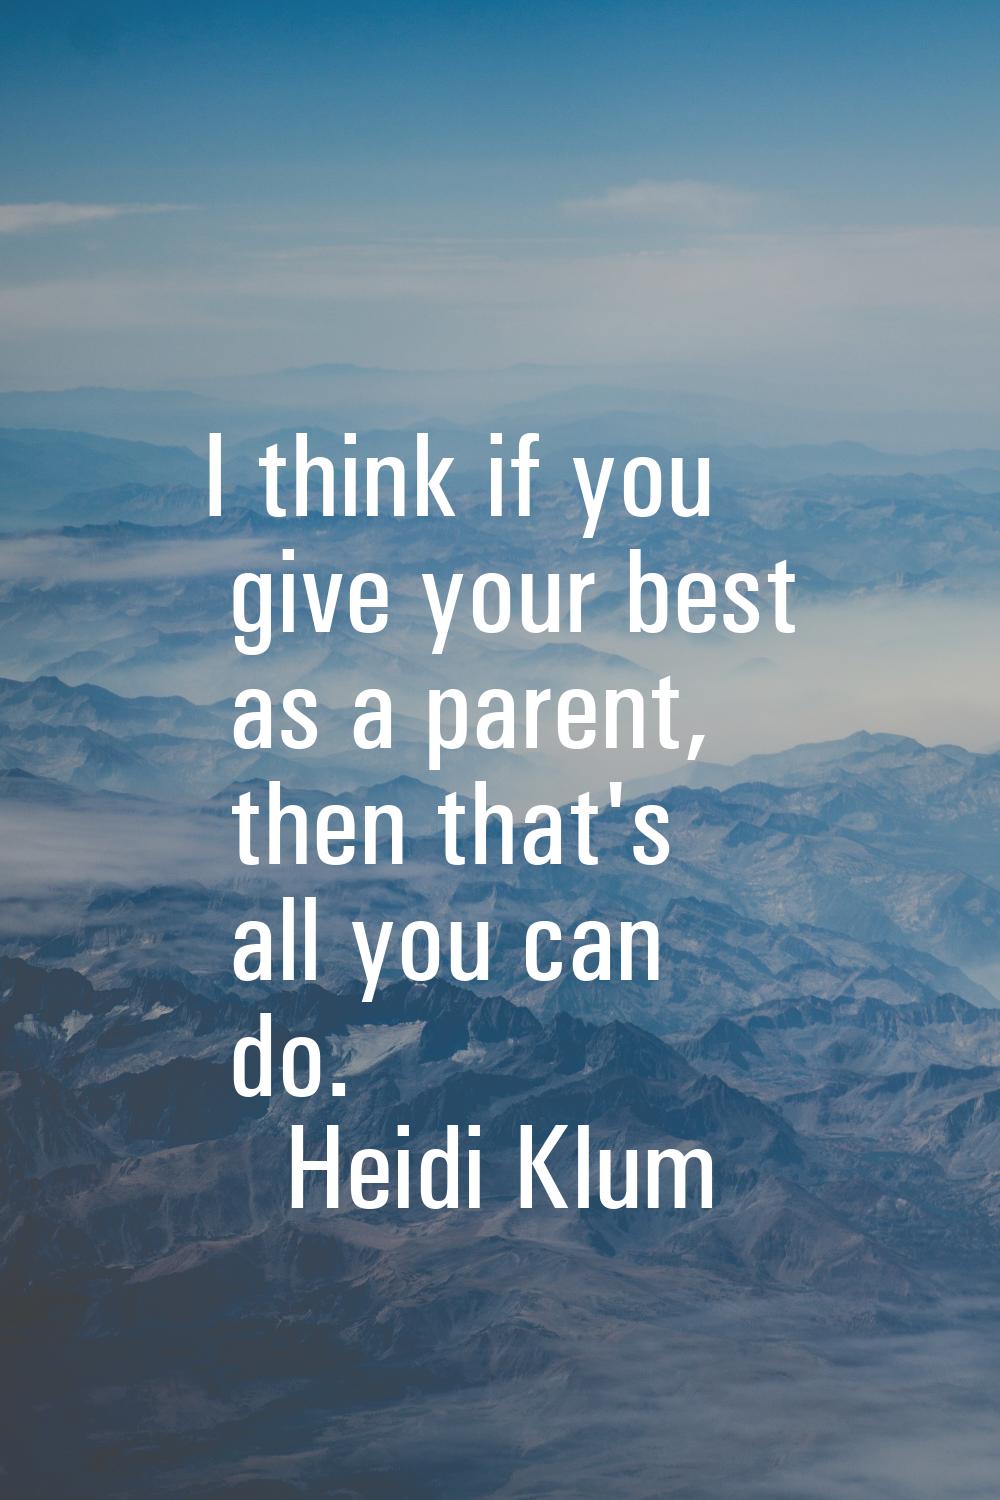 I think if you give your best as a parent, then that's all you can do.